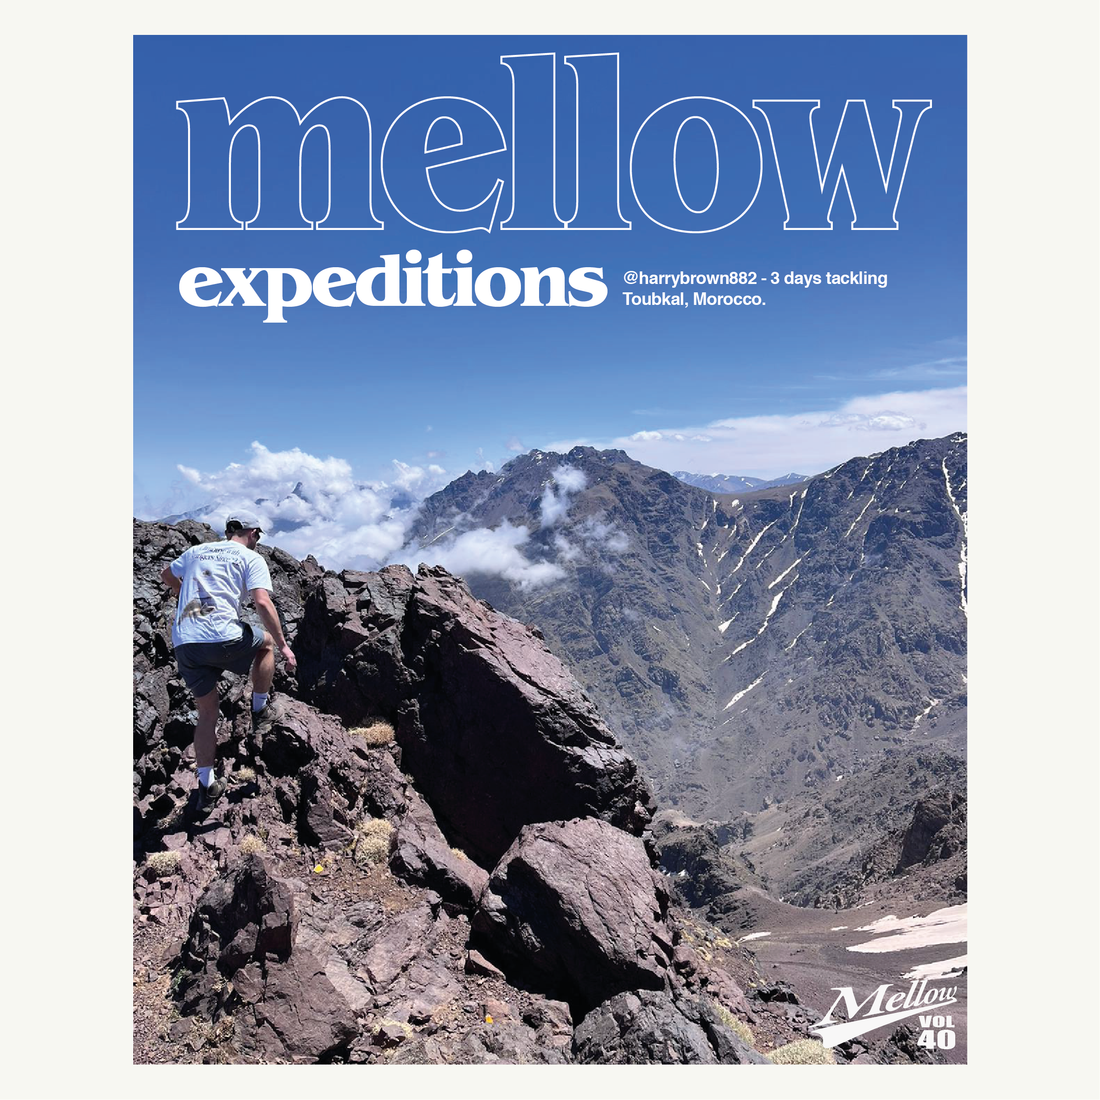 Mellow Expeditions - @harrybrown882